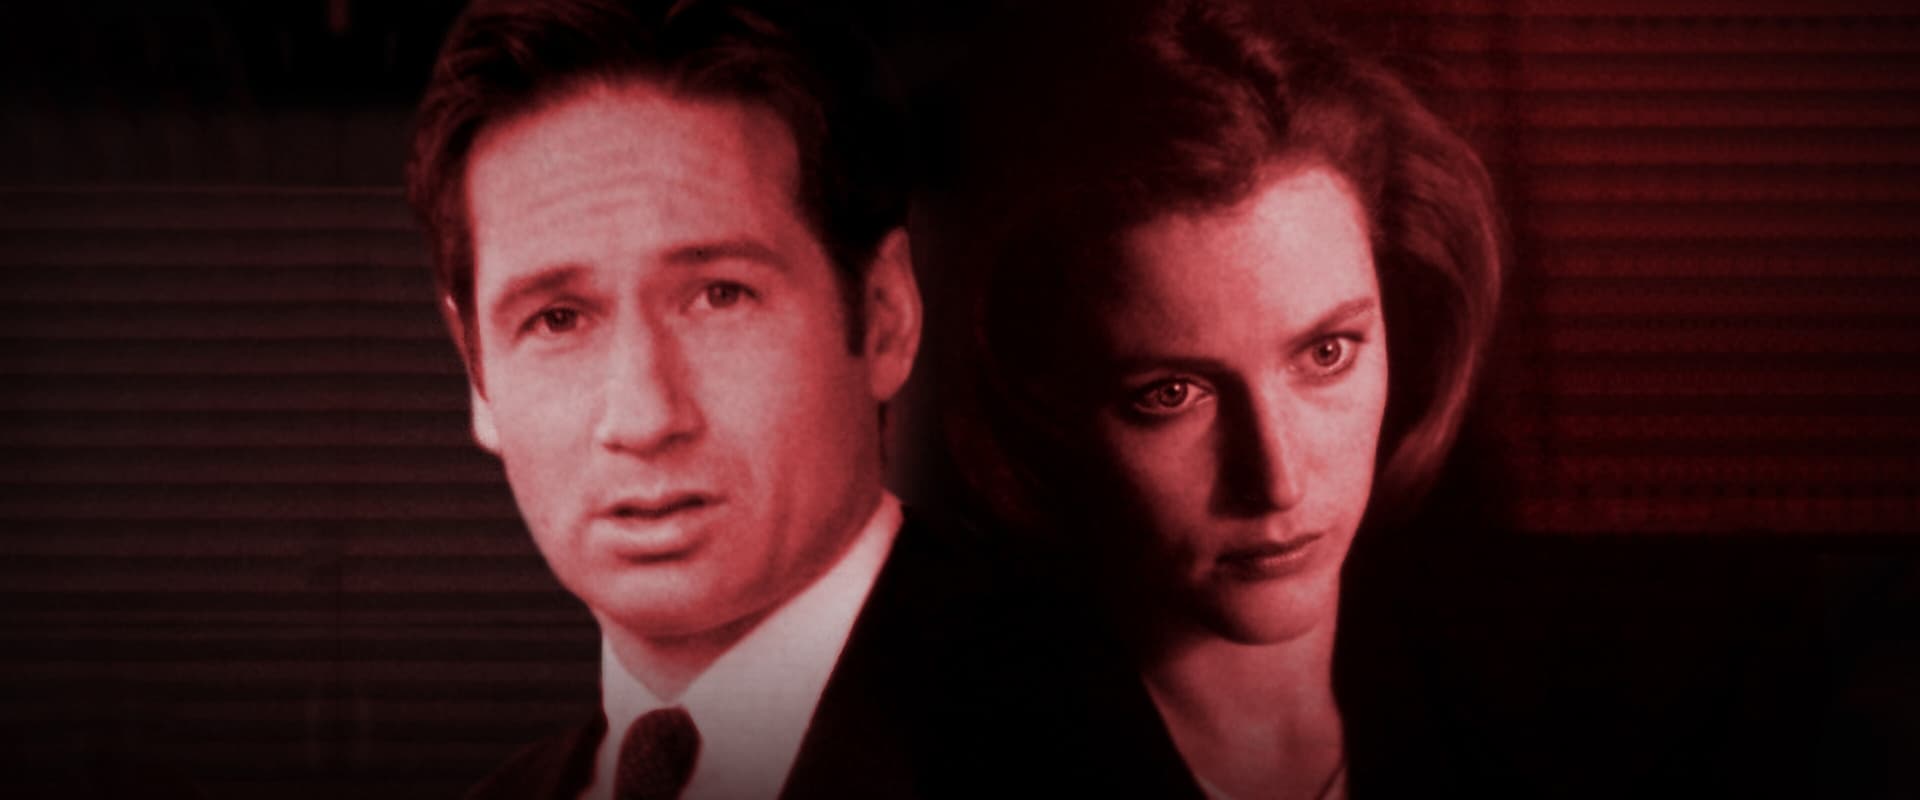 Inside The X-Files